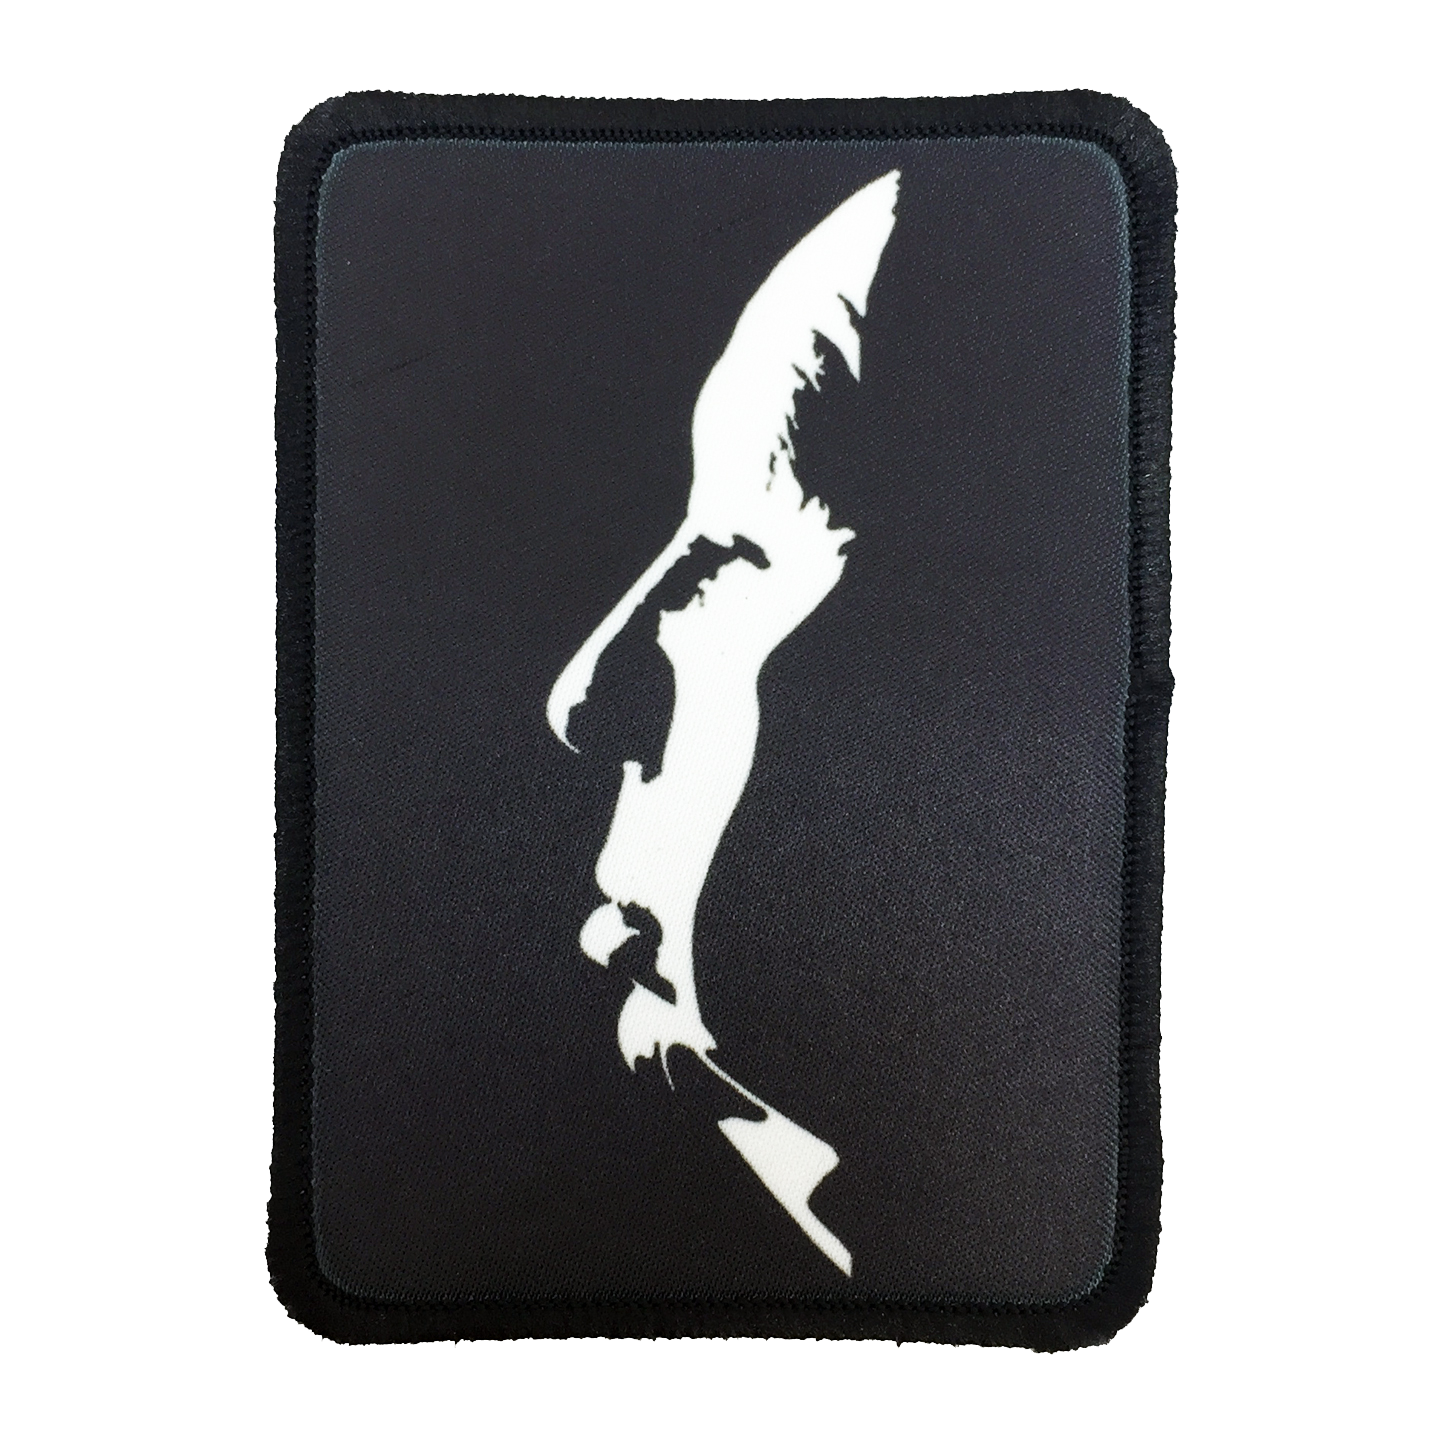 Alfred Hitchcock Iron-On Patch - UNMASKED Horror & Punk Patches and Decor